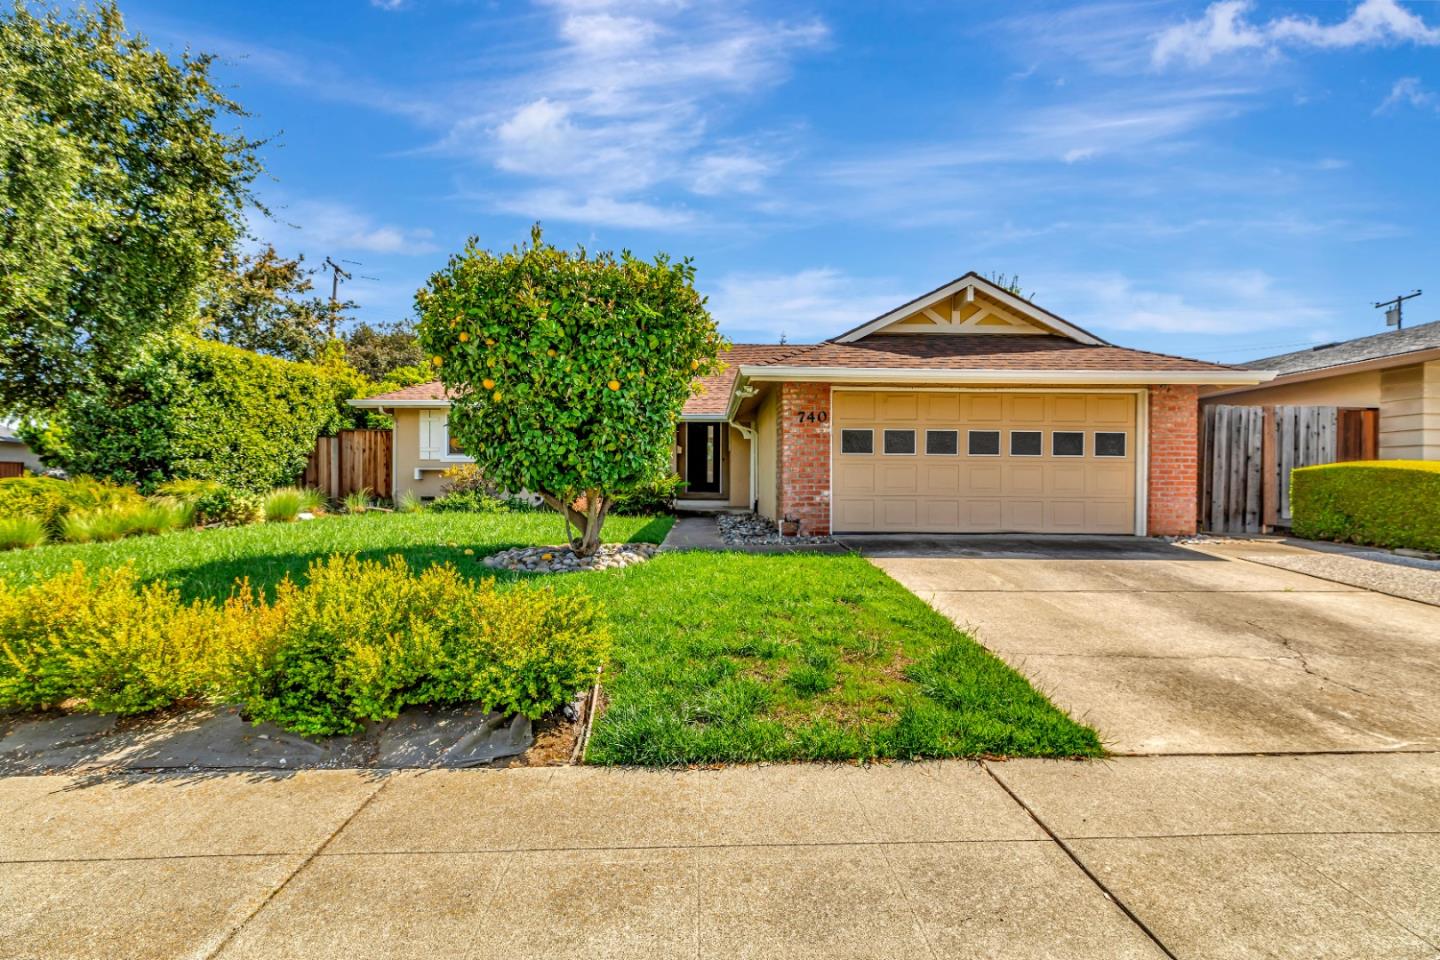 Photo of 740 Cardigan Dr in Sunnyvale, CA